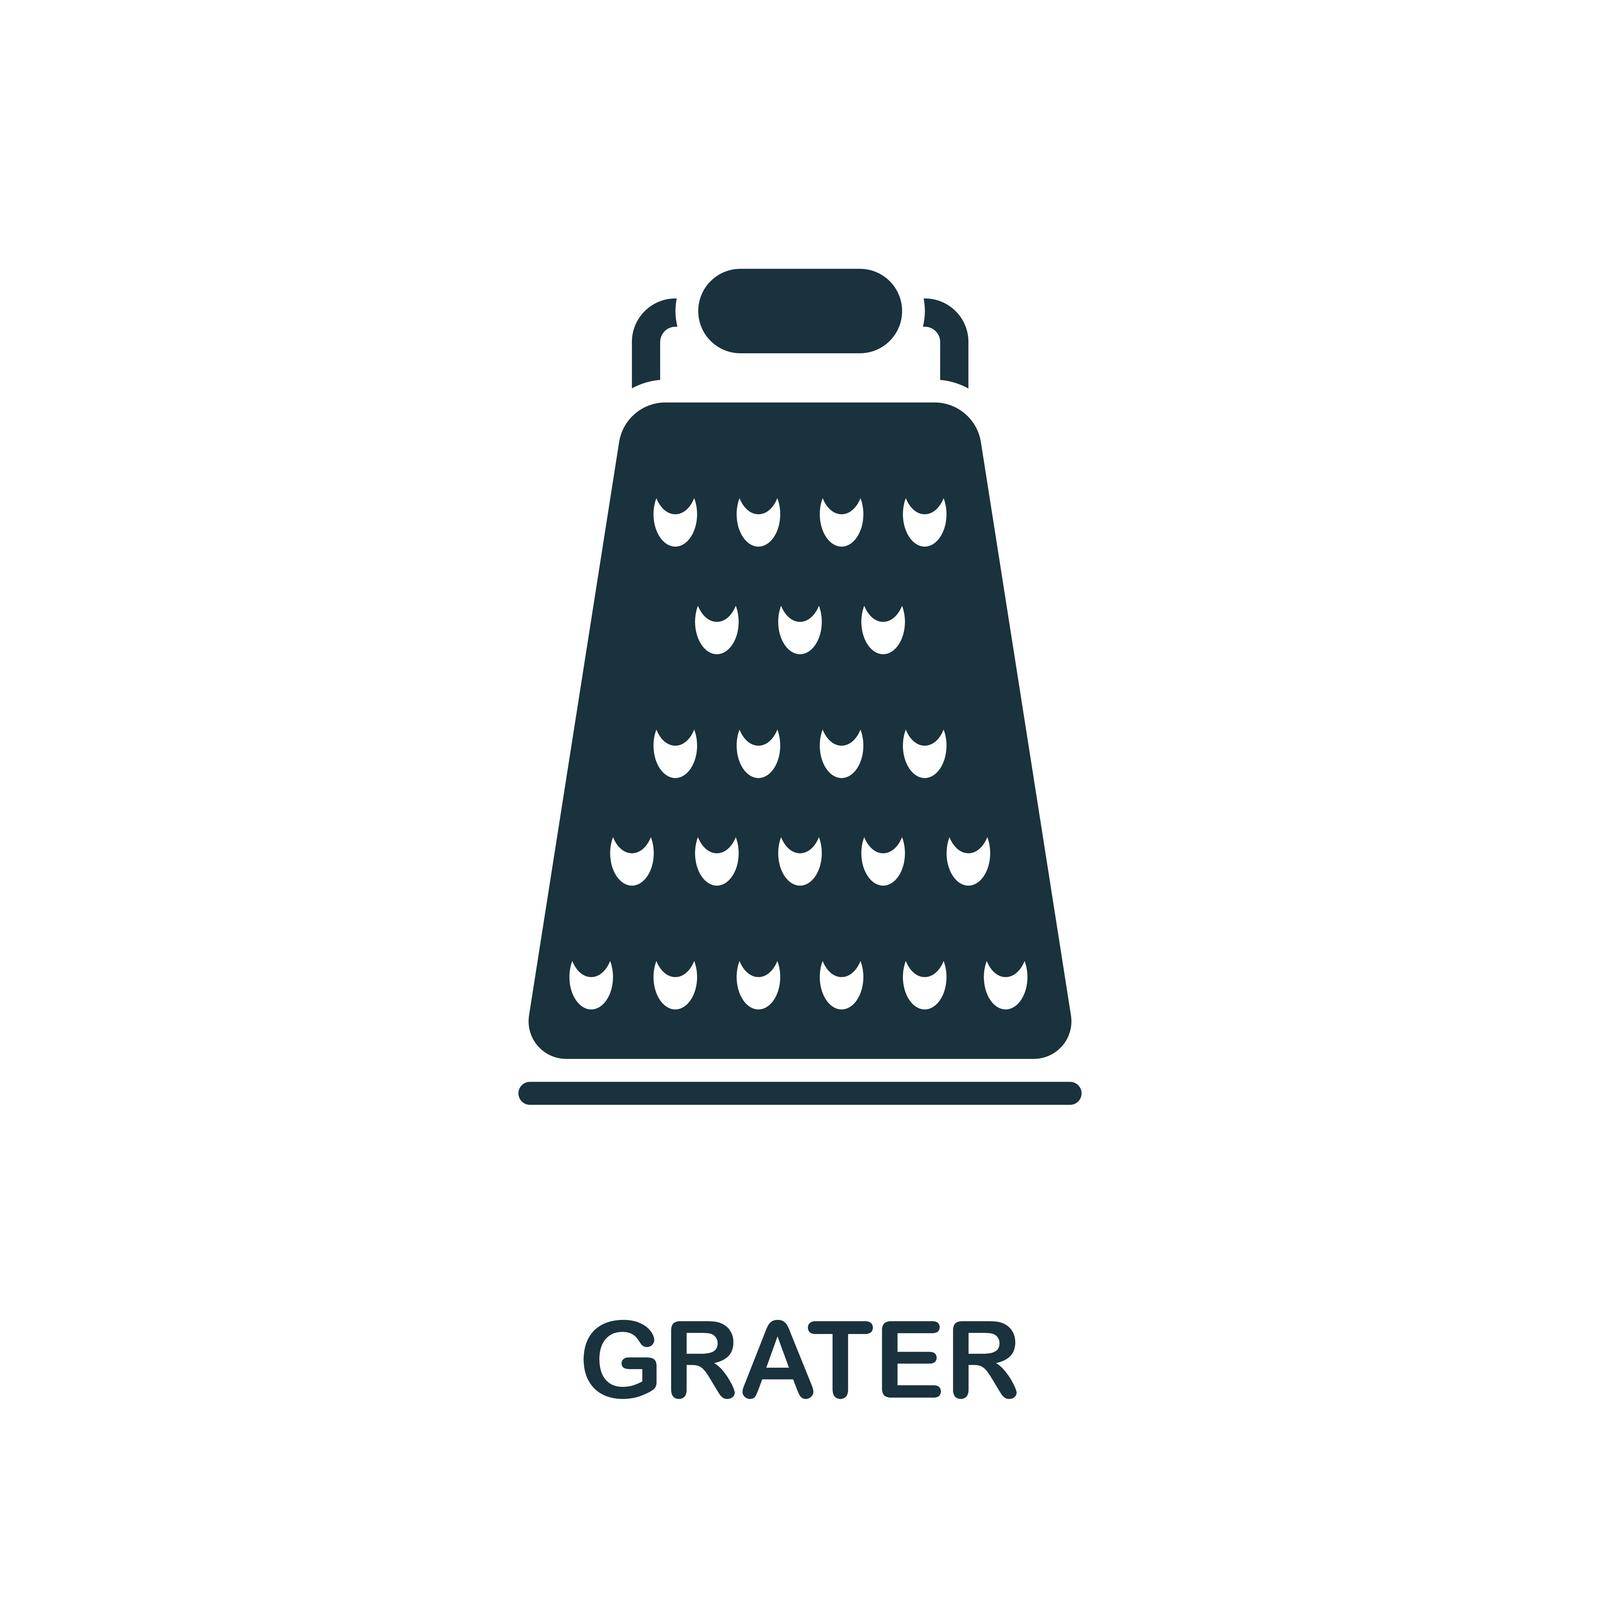 Grater icon. Simple illustration from kitchen collection. Monochrome Grater icon for web design, templates and infographics.